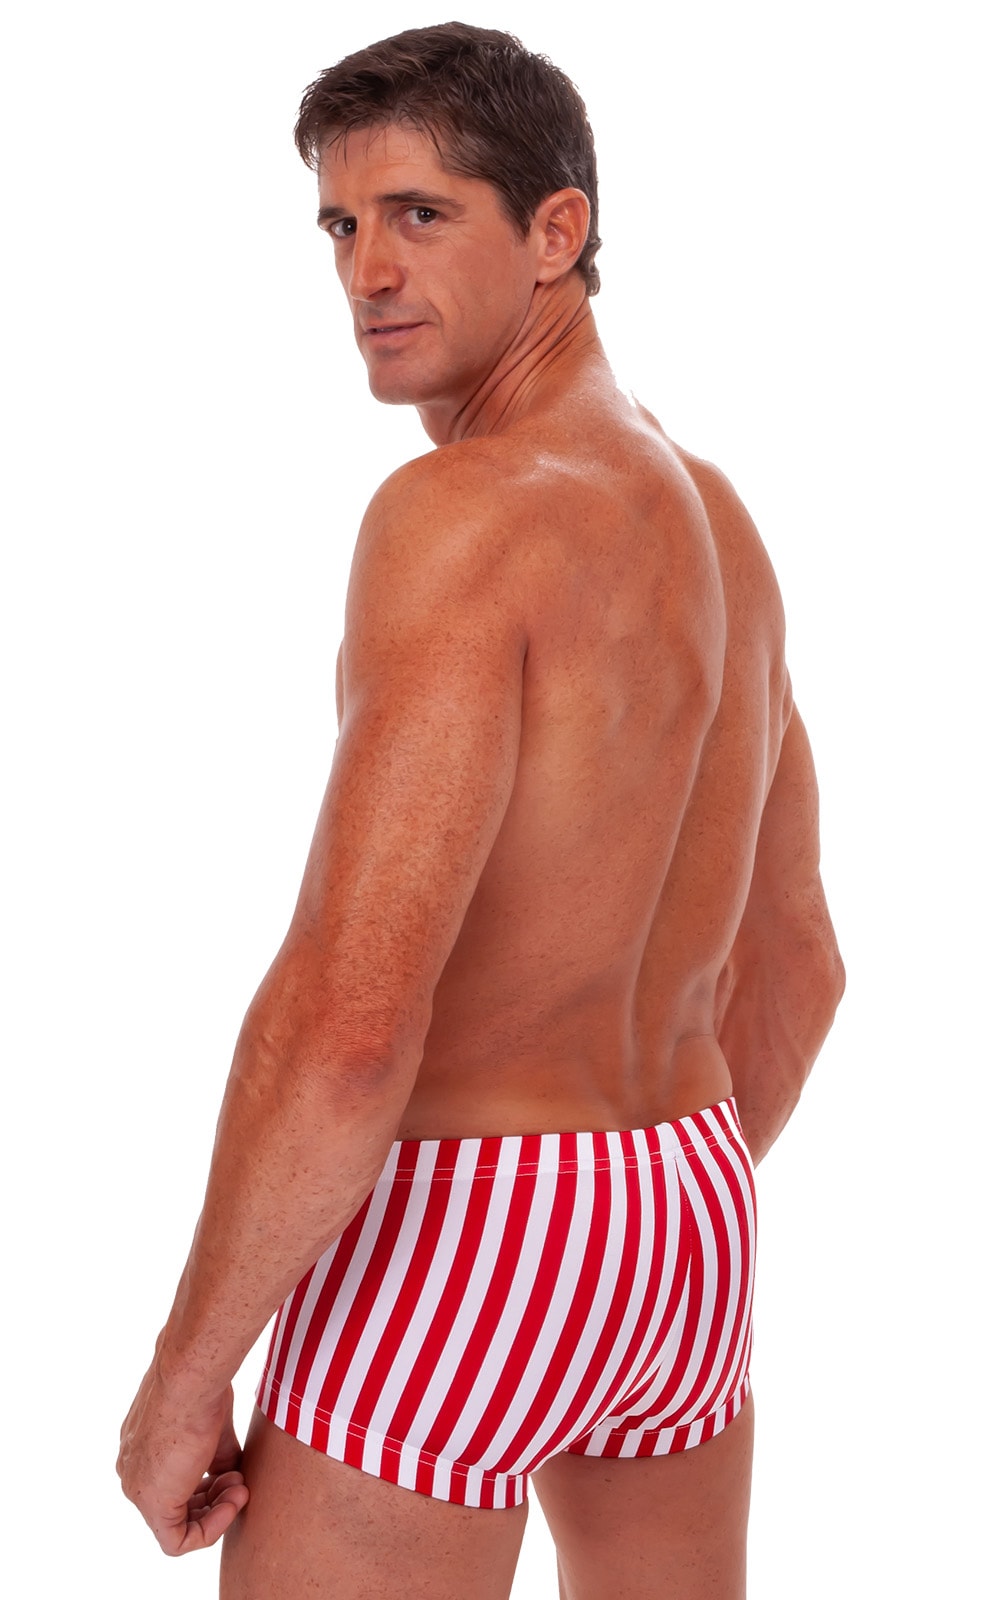 Square Cut - Fitted - Watersports Swim Trunks in Stars and Stripes, Rear View